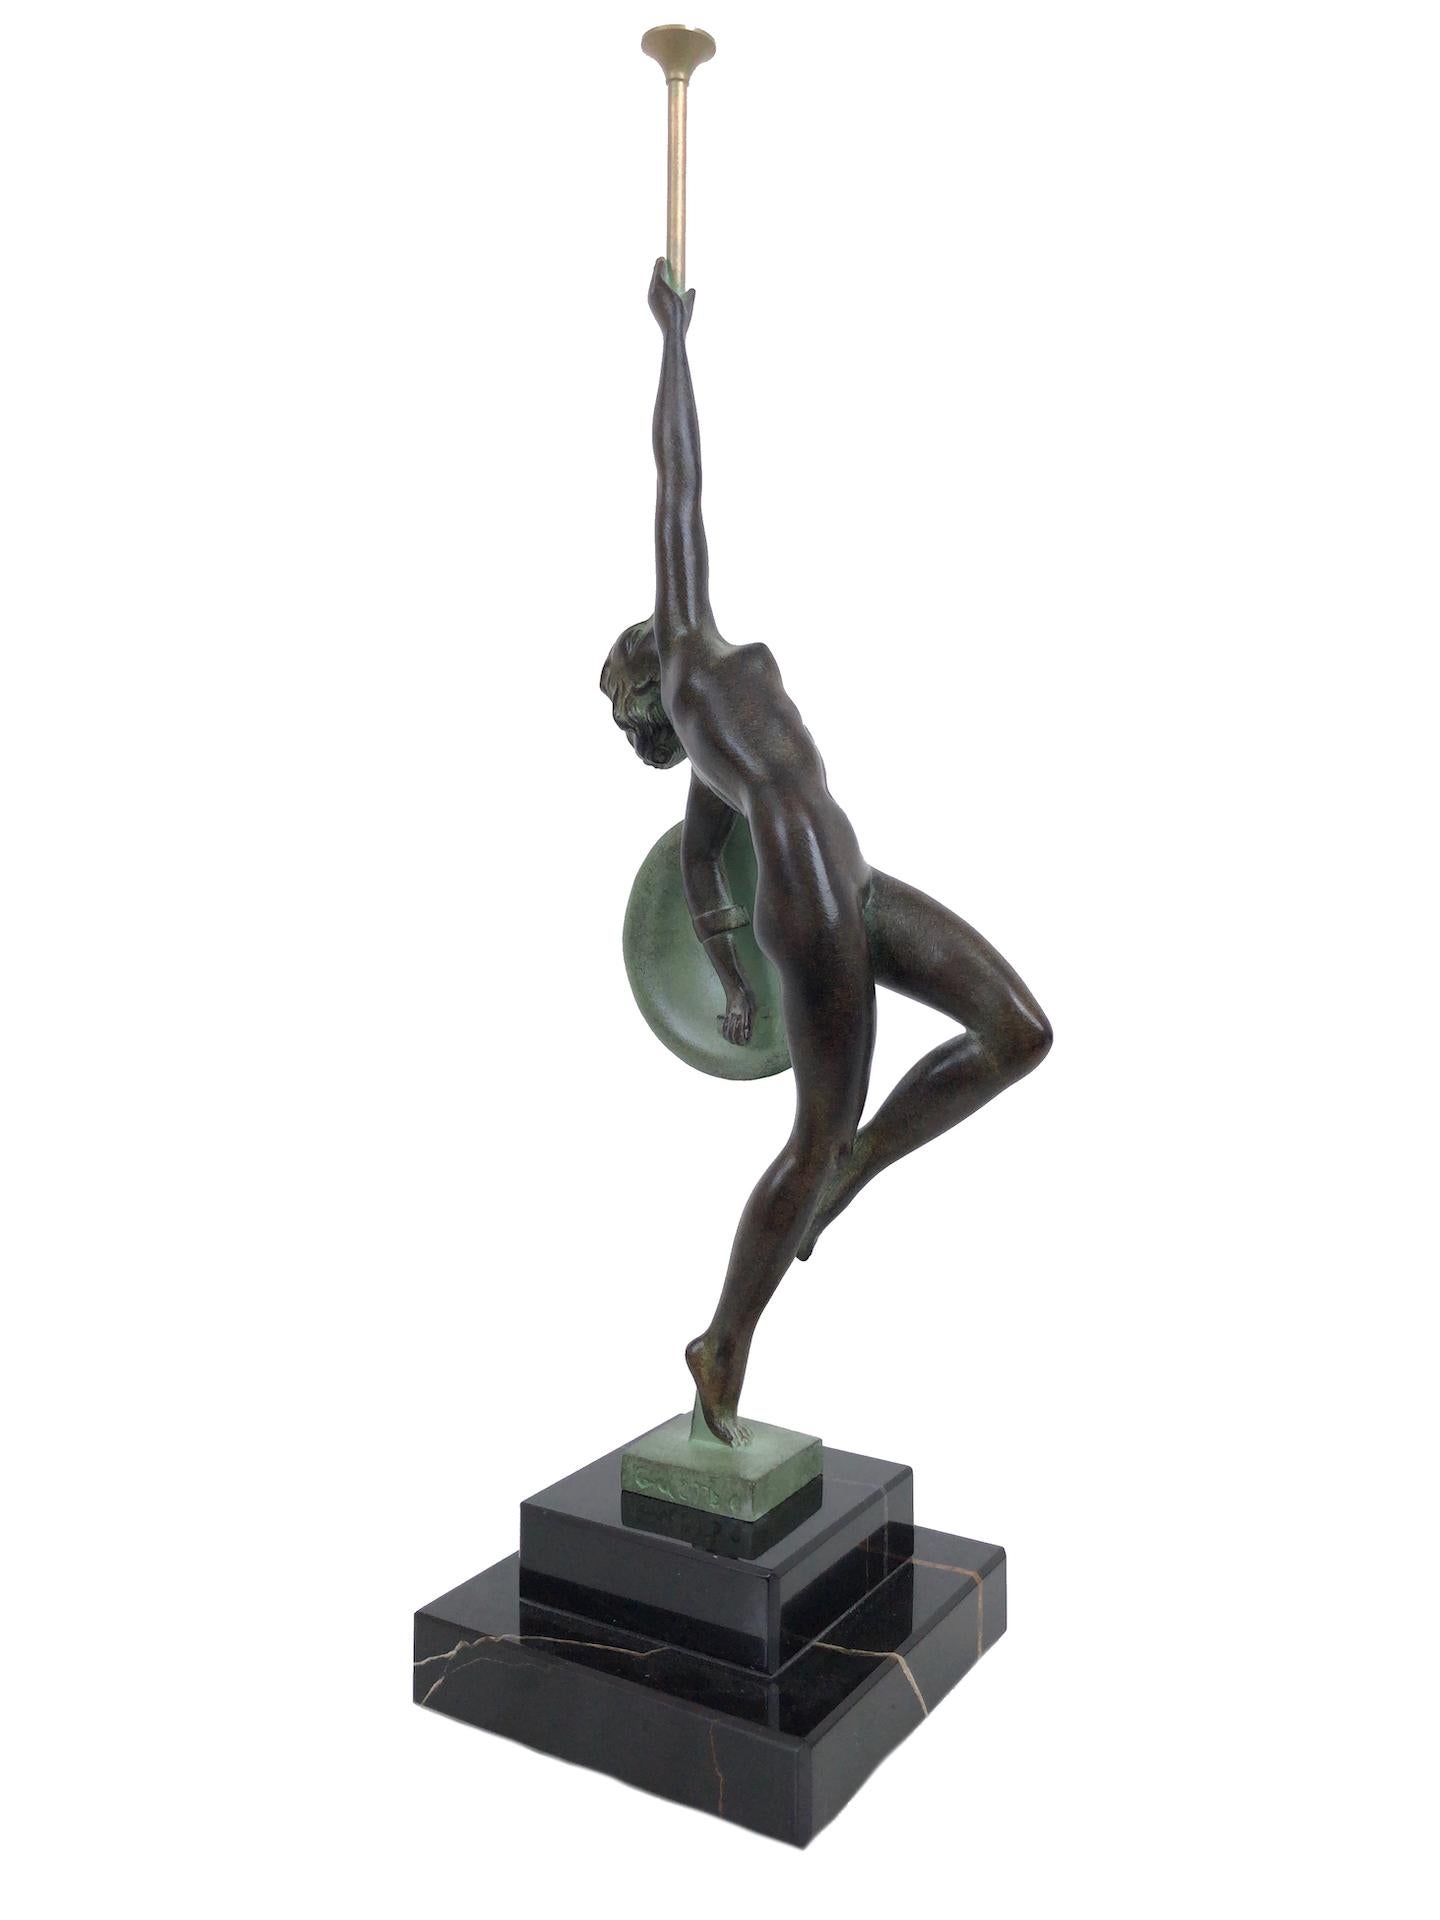 Contemporary Jericho Trumpet Sculpture from Raymonde Guerbe by Max Le Verrier Art Deco Style